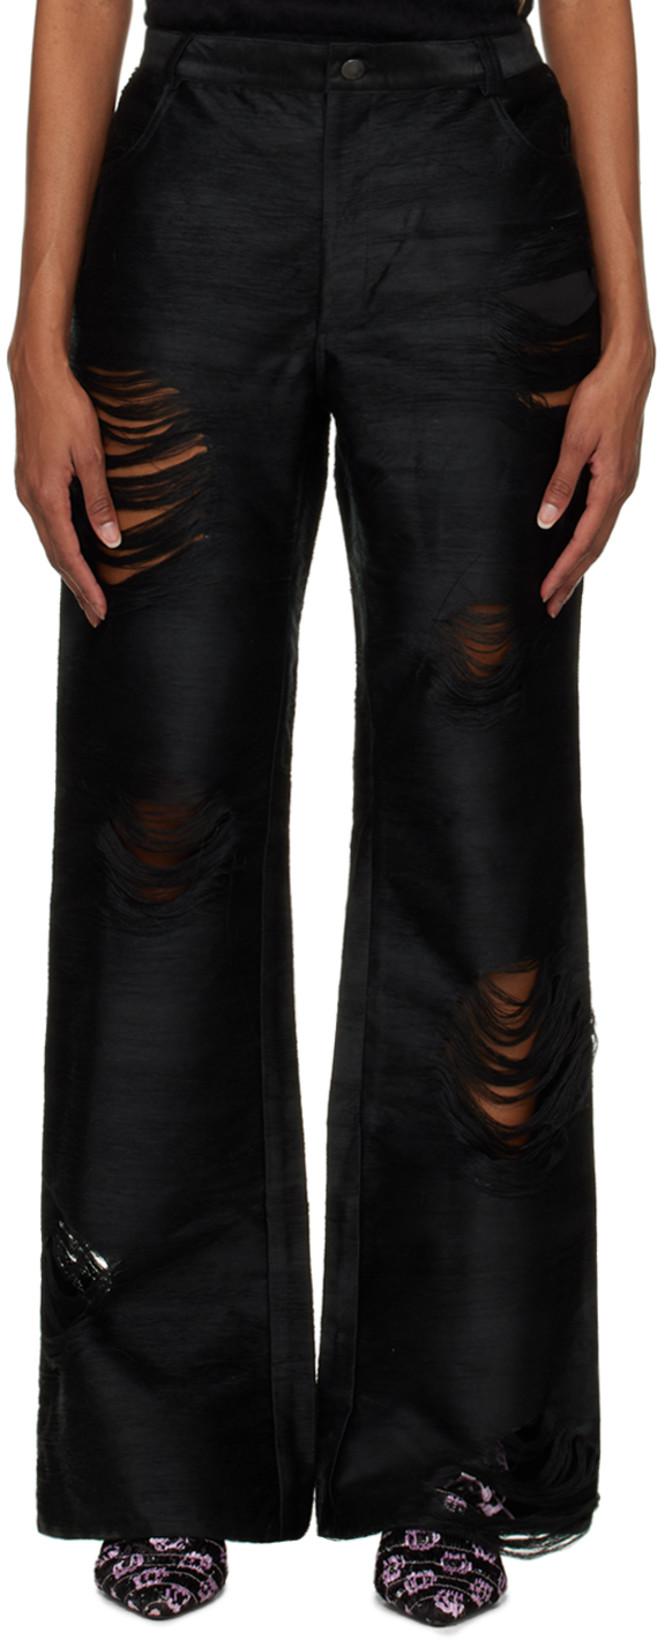 Black Distressed Trousers by CONSTANCA ENTRUDO